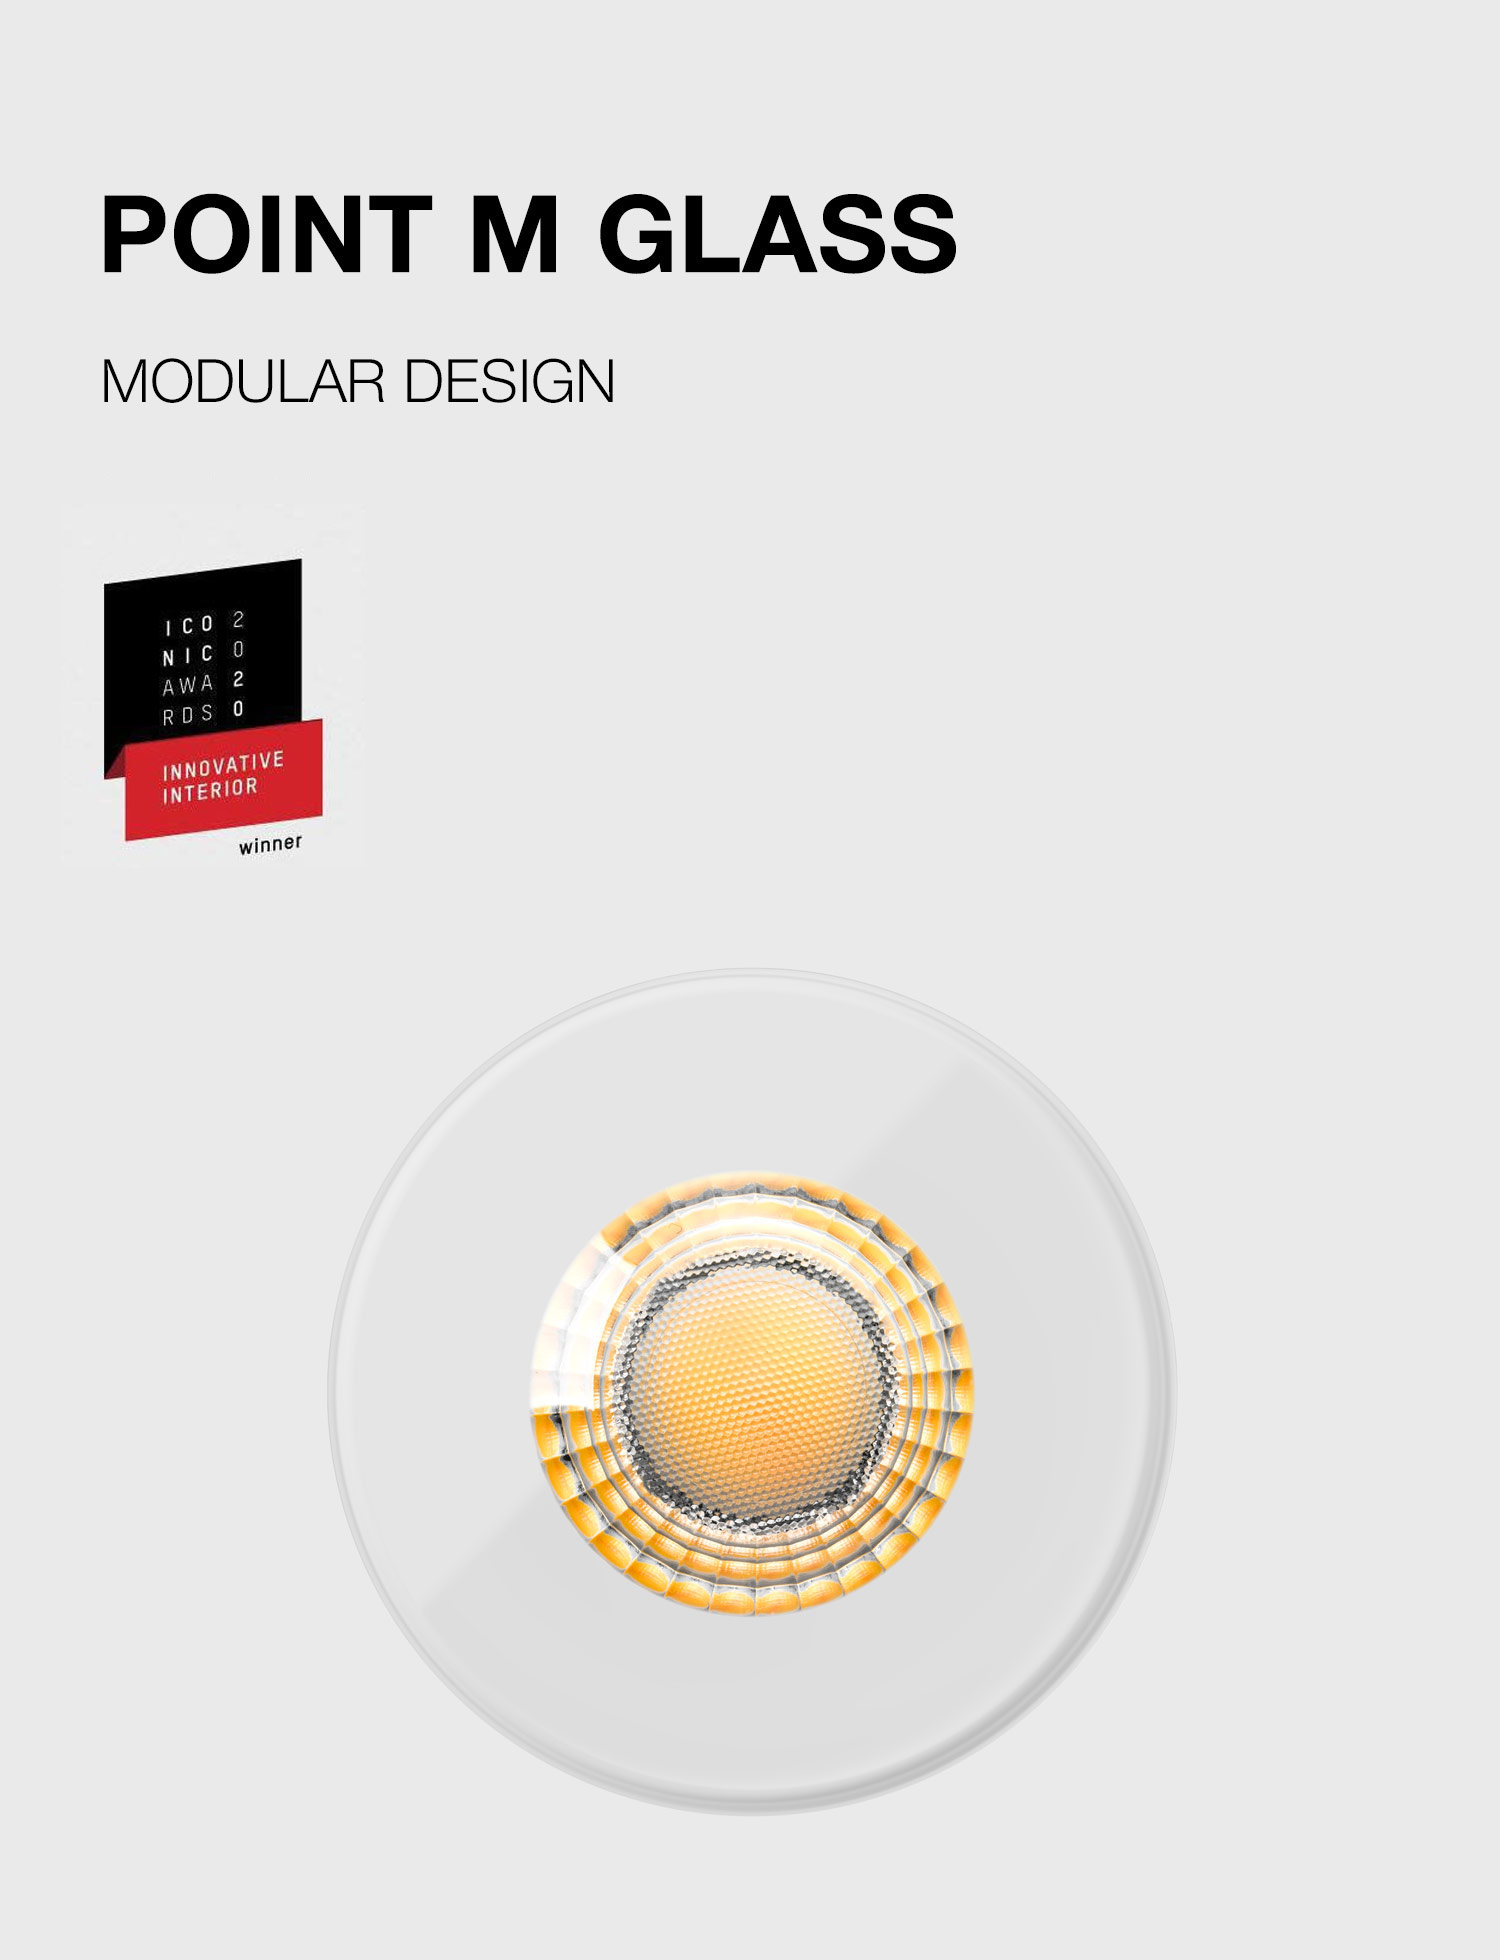 POINT M GLASS